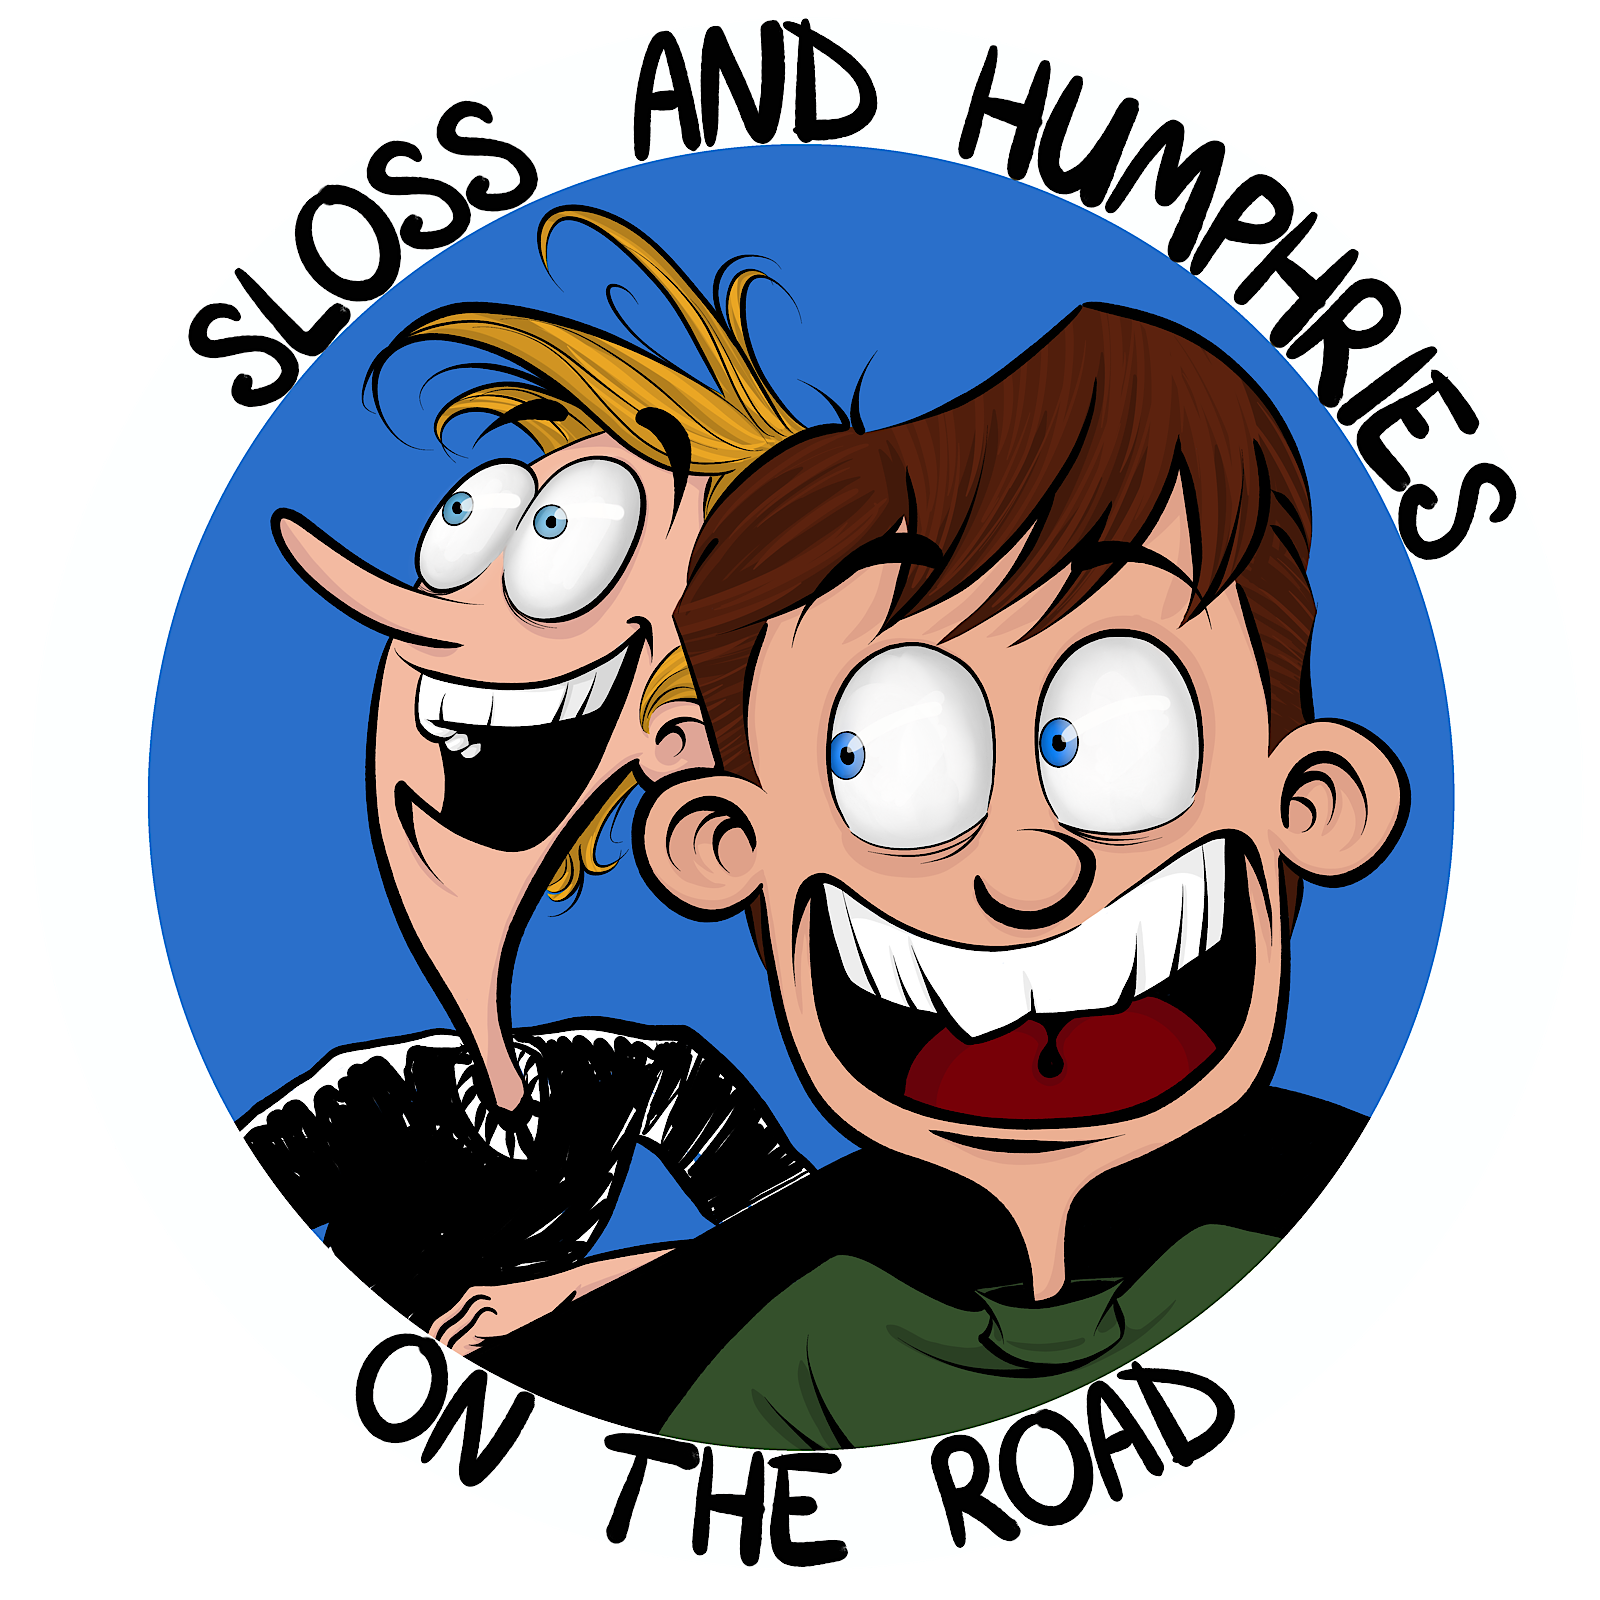 Sloss and Humphries On The Road